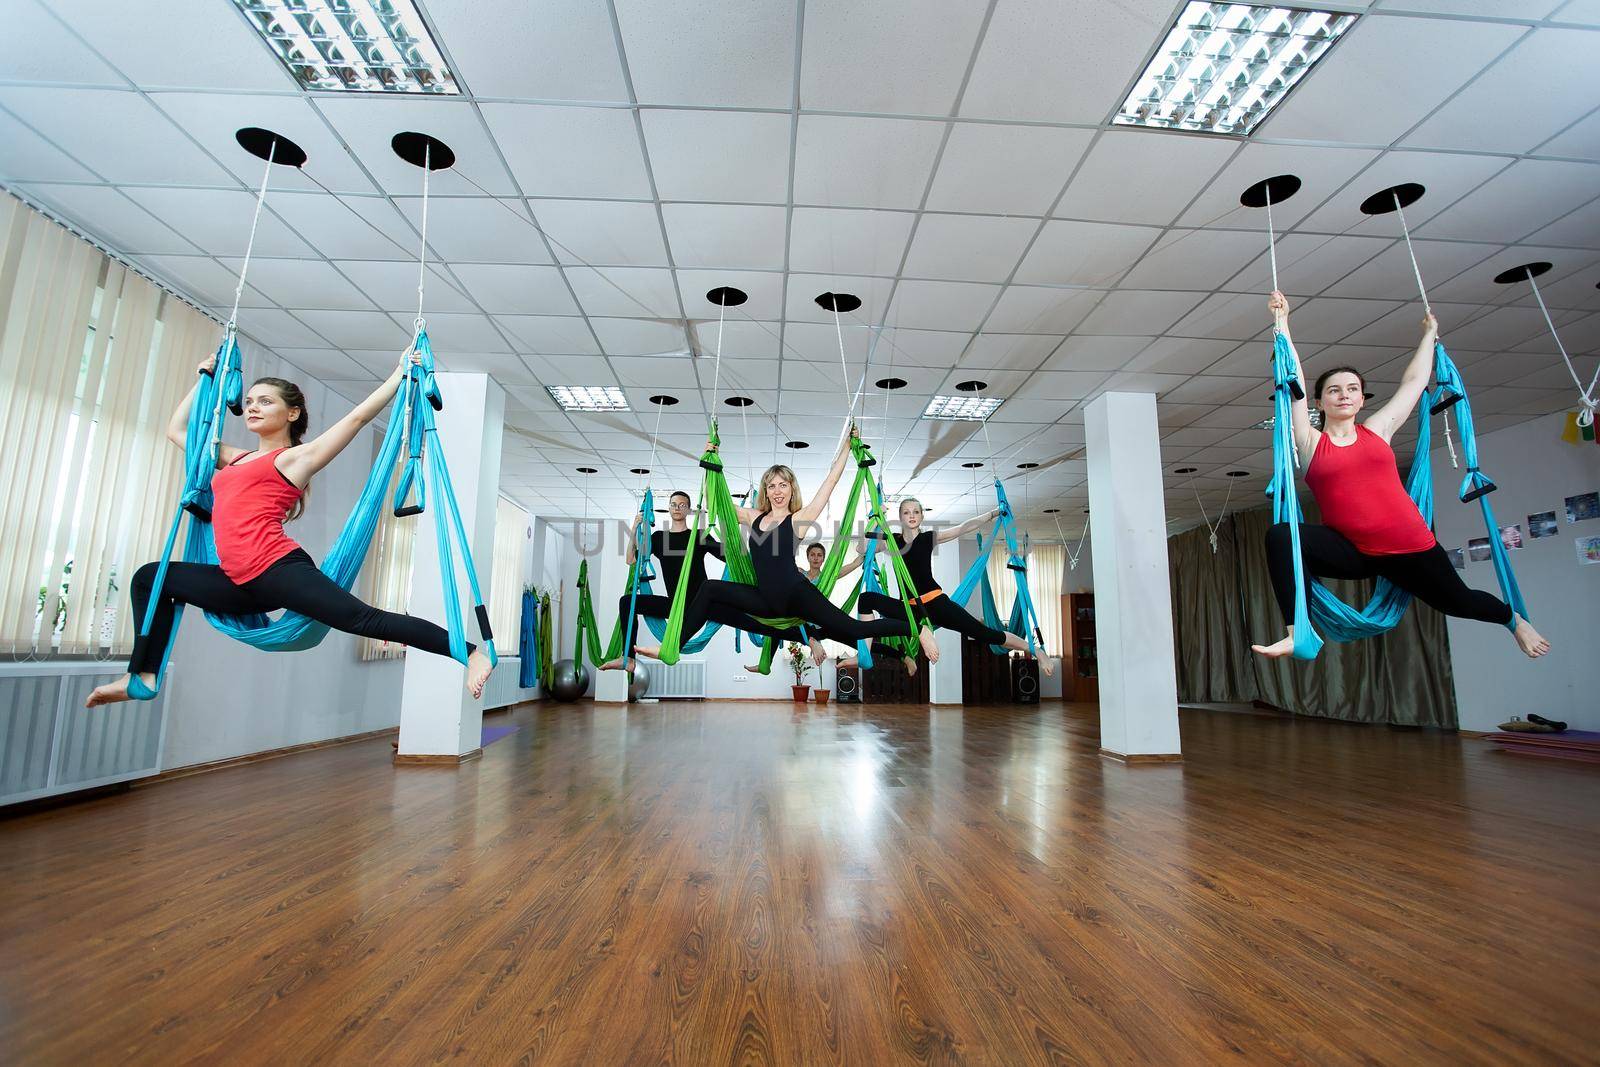 Group of young people practicing yoga on hammock at health club. Fitness, stretch, balance. by StudioPeace